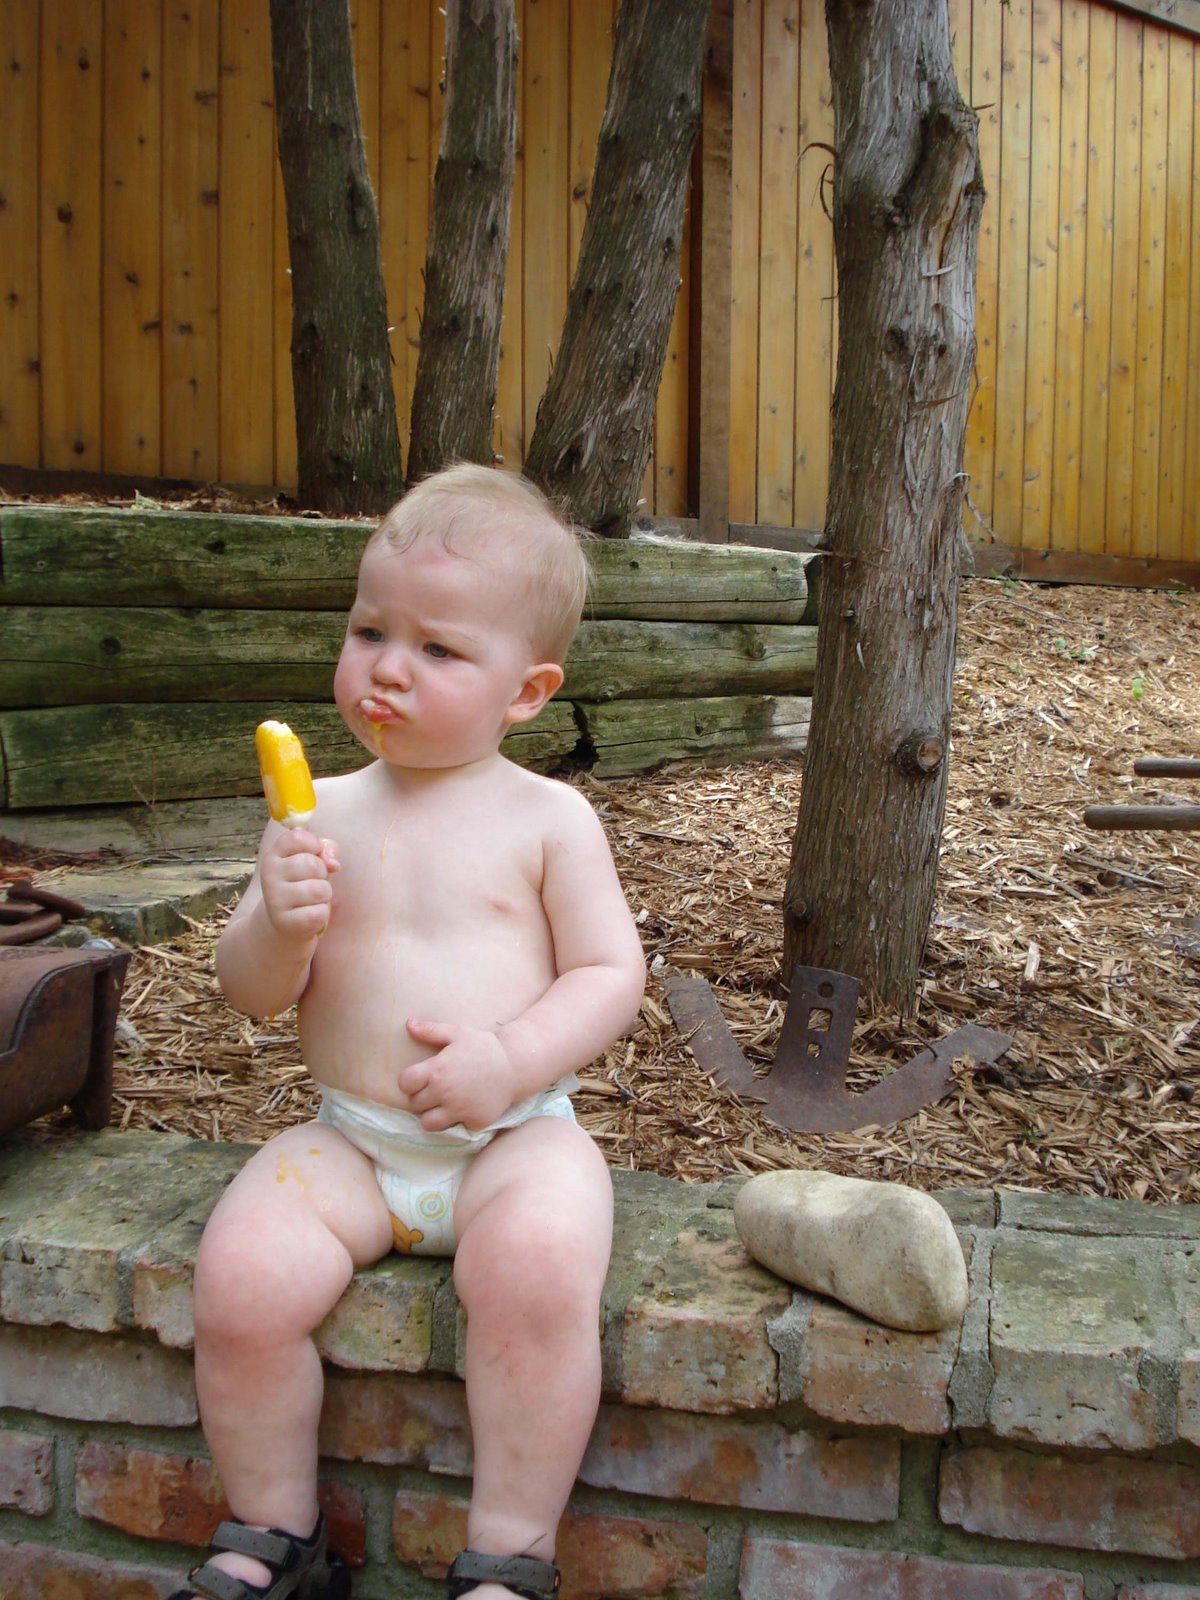 [Cole+contemplating+popsicle+7-6-08.jpg]